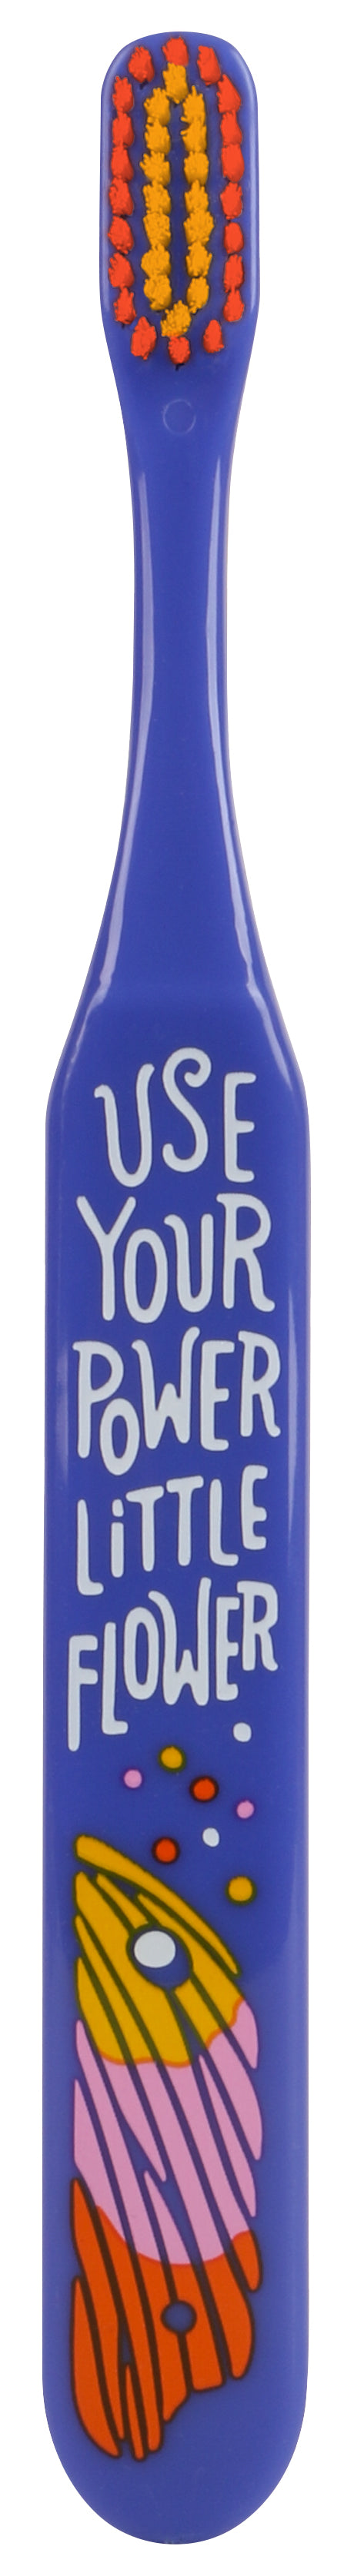 Toothbrush : Use your power little flower